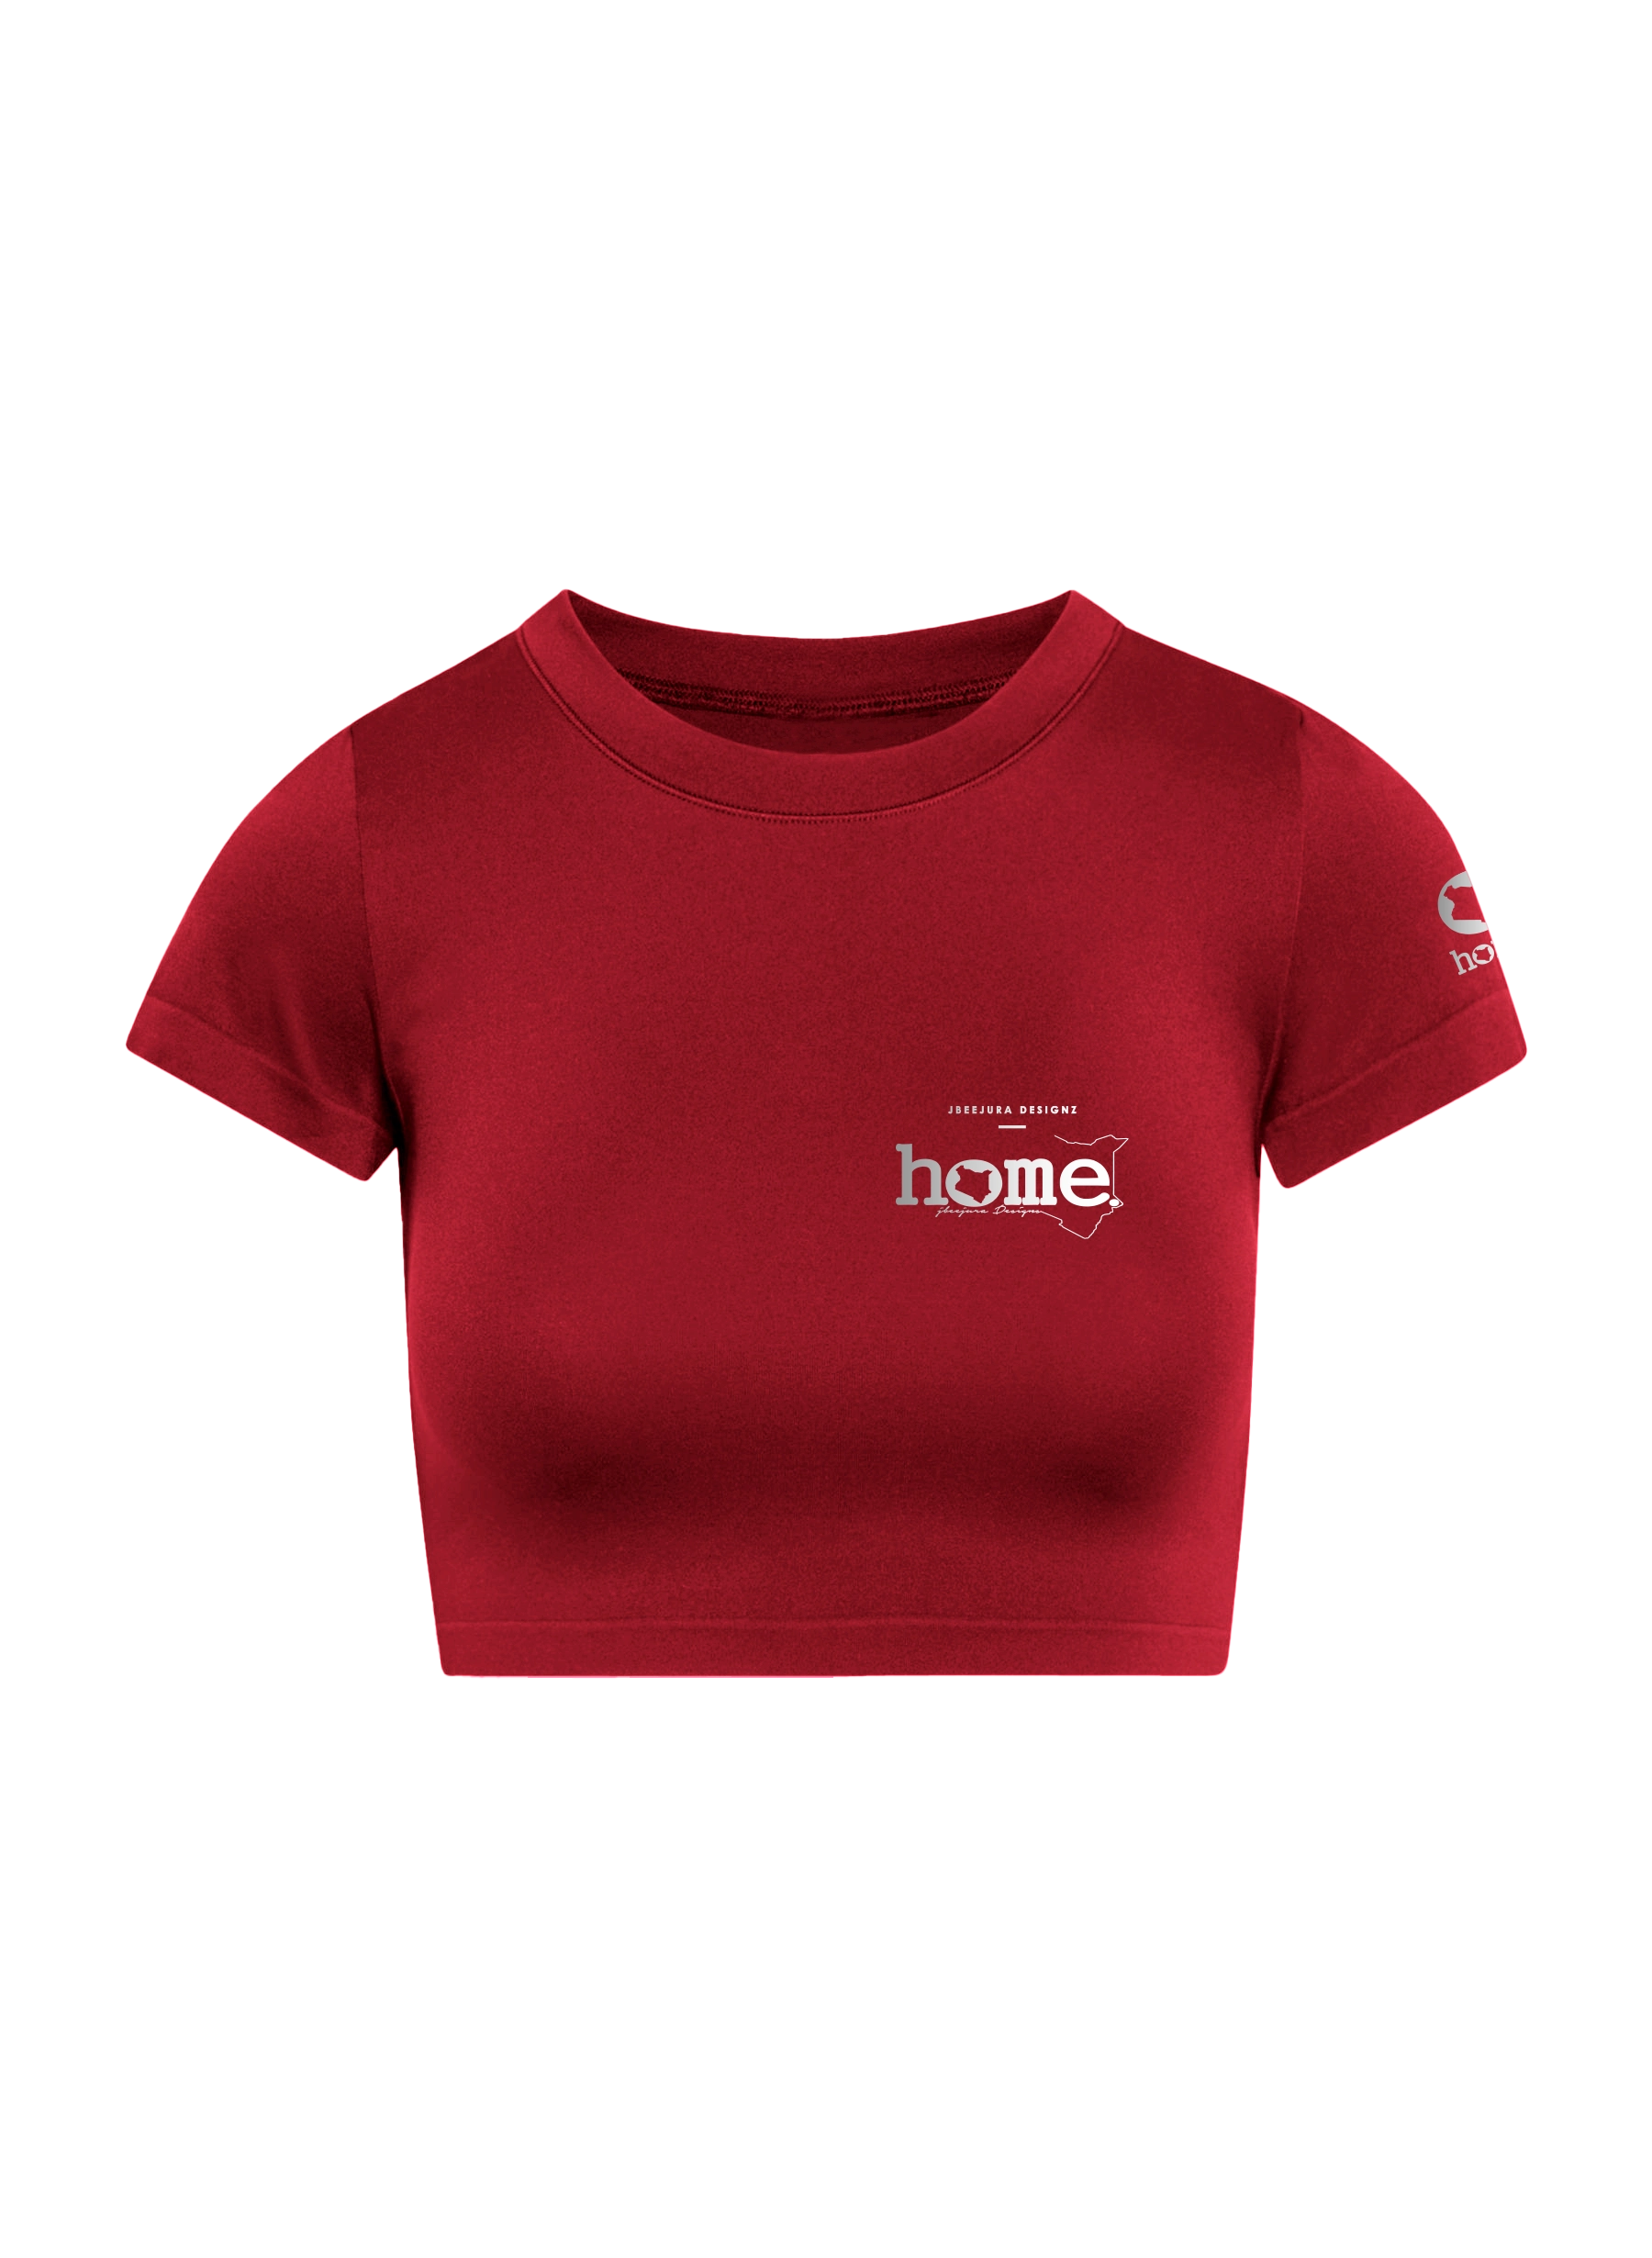 home_254 SHORT SLEEVED MAROON RED CROPPED ARIA TEE WITH A SILVER 3D WORDS PRINT – COTTON PLUS FABRIC